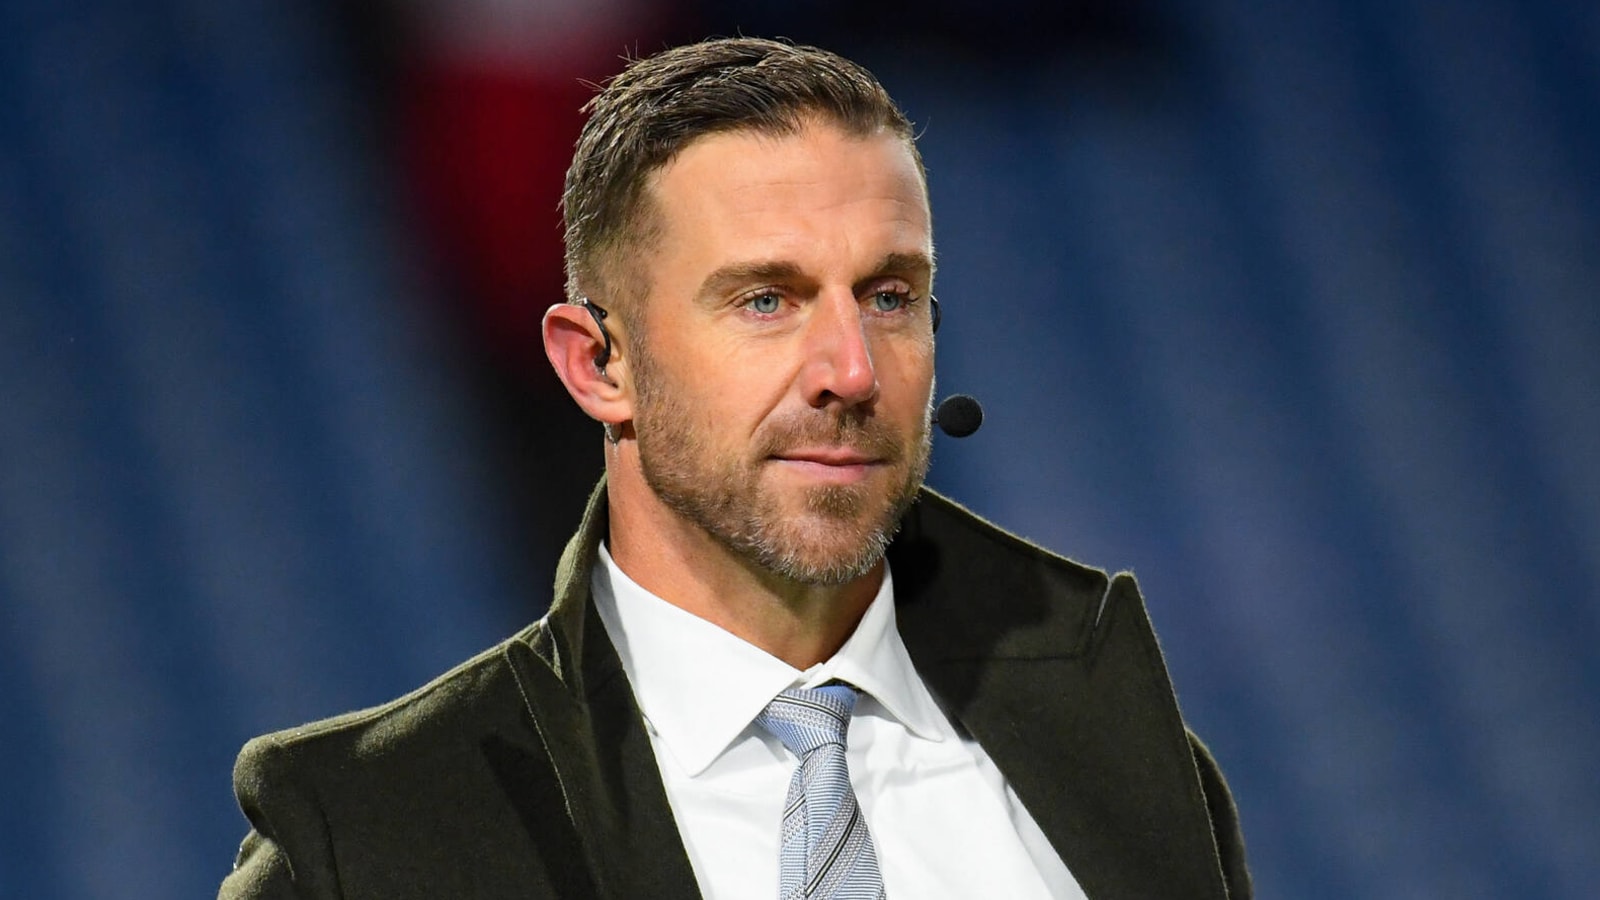 Alex Smith reveals update on daughter after emergency brain surgery